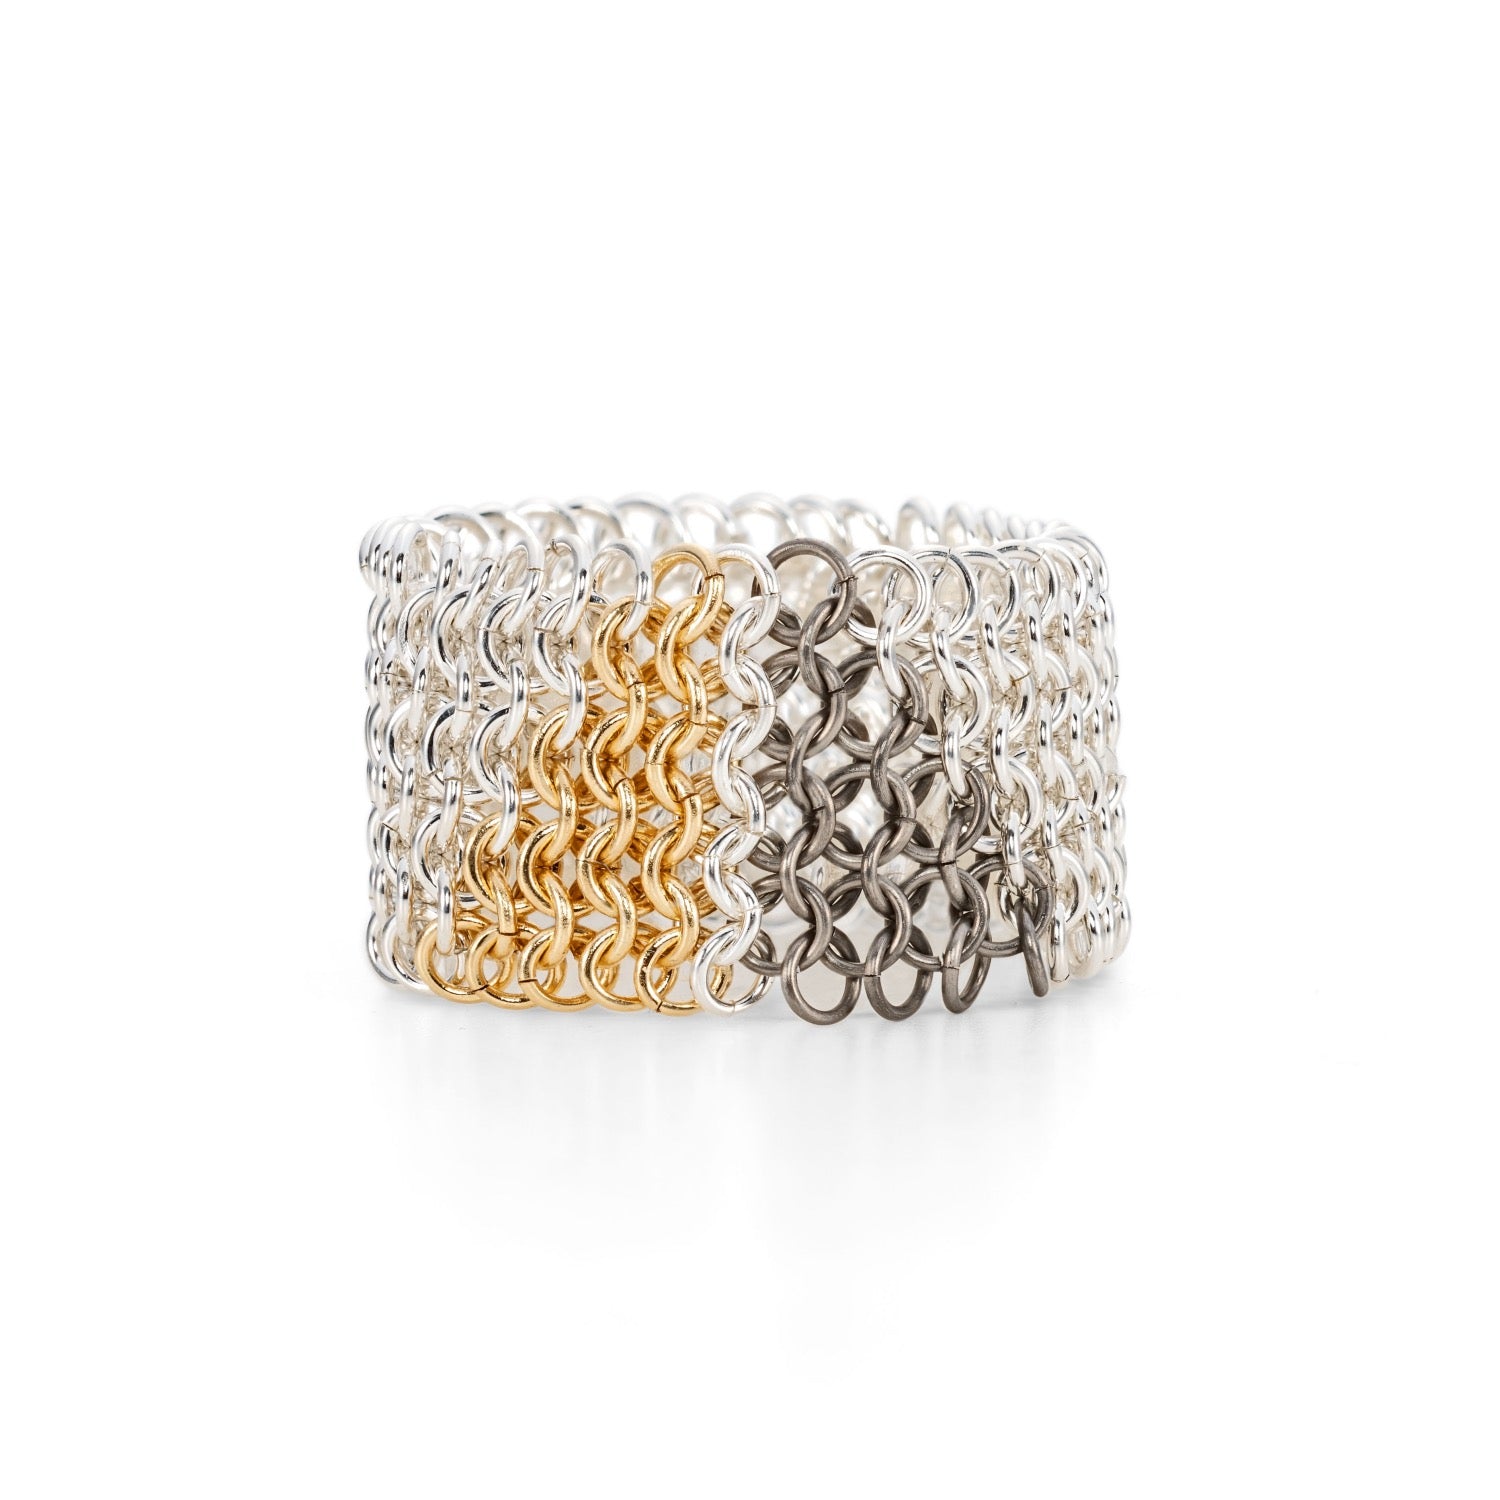 Sunlit Tor's Collection, chainmail ring silver, 18ct yellow gold and titanium handmade jewellery by Corrinne Eira Evans